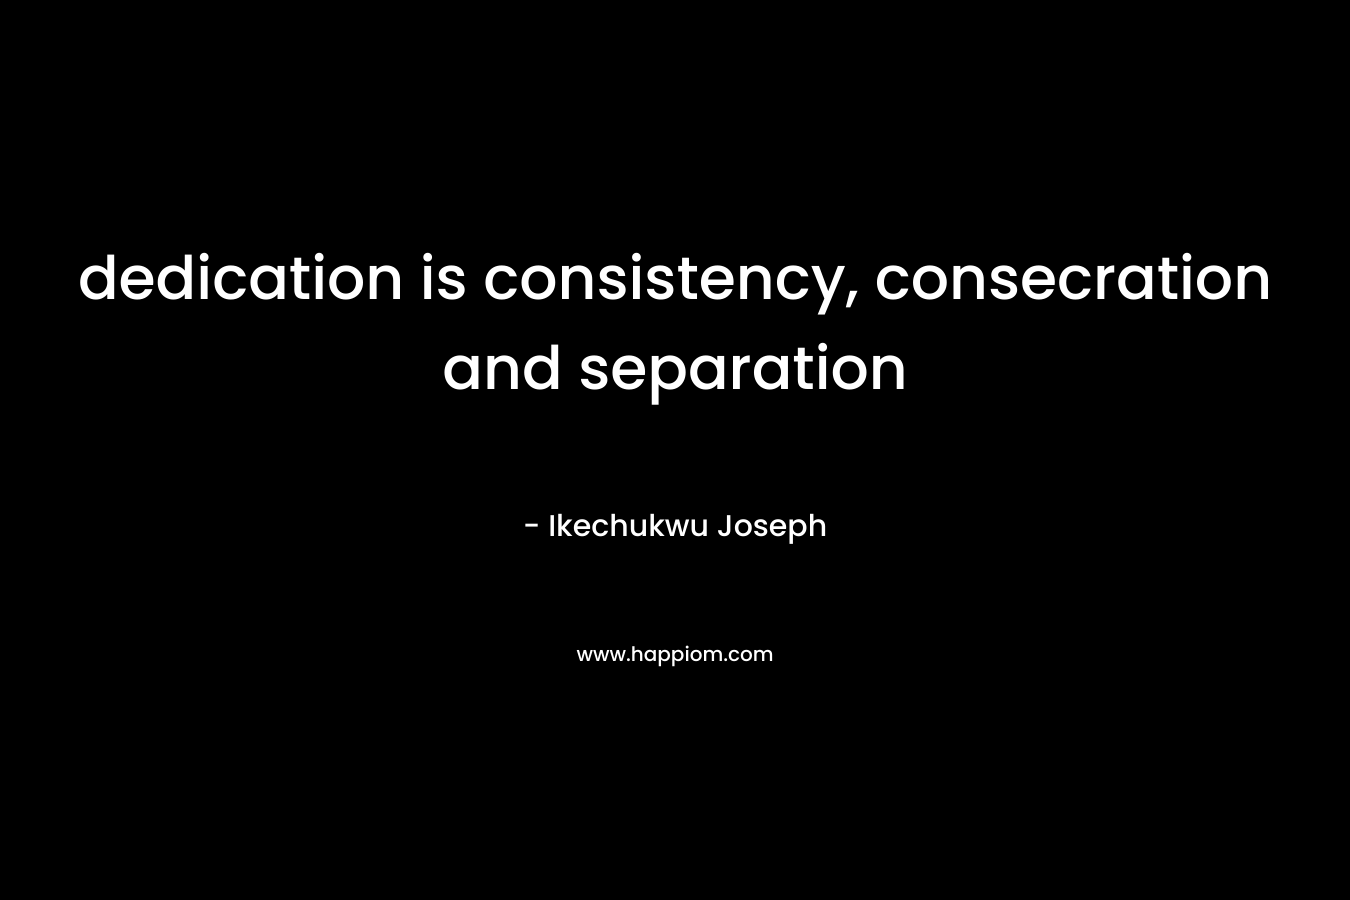 dedication is consistency, consecration and separation